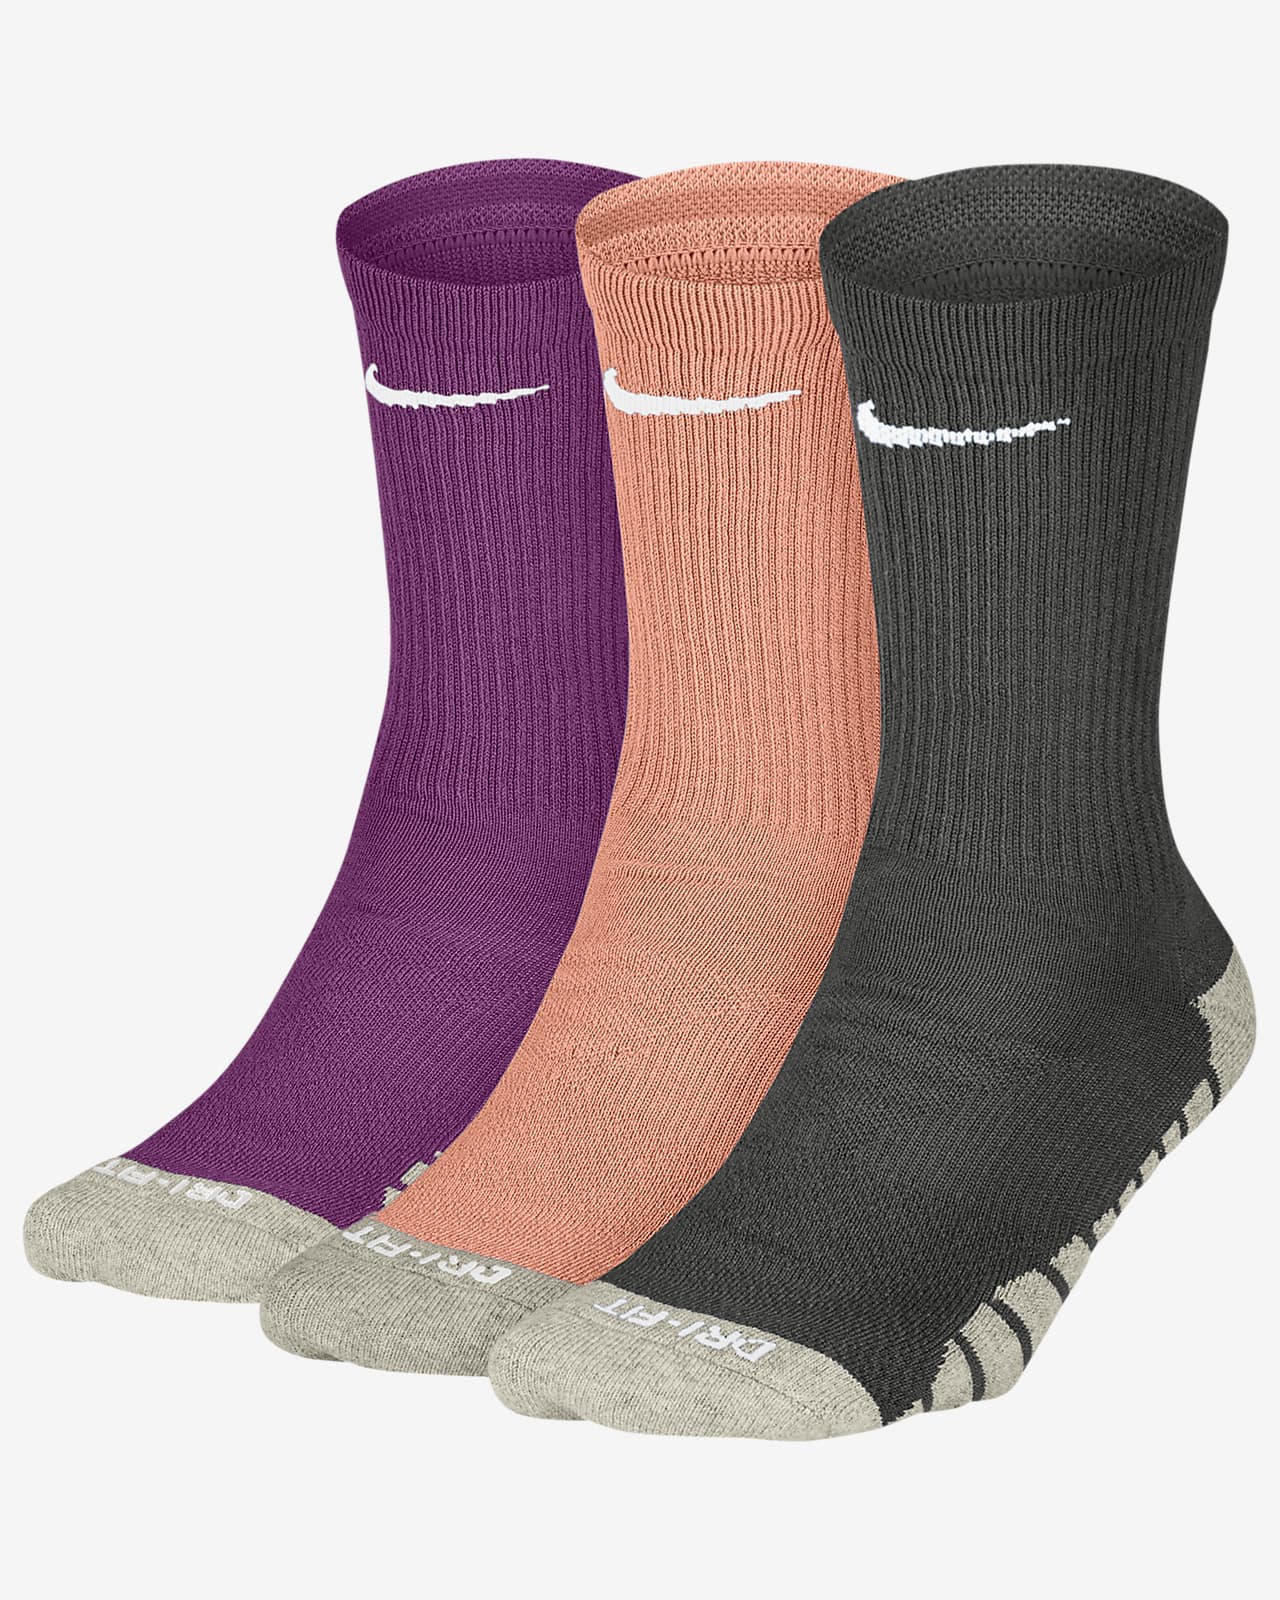 https://static.nike.com/a/images/t_PDP_1280_v1/f_auto,q_auto:eco/728361bd-a0b2-47ad-bf85-f2e51bbc6cf6/calcetines-de-entrenamiento-everyday-max-cushioned-3-pares-2KTrDYJ8.png